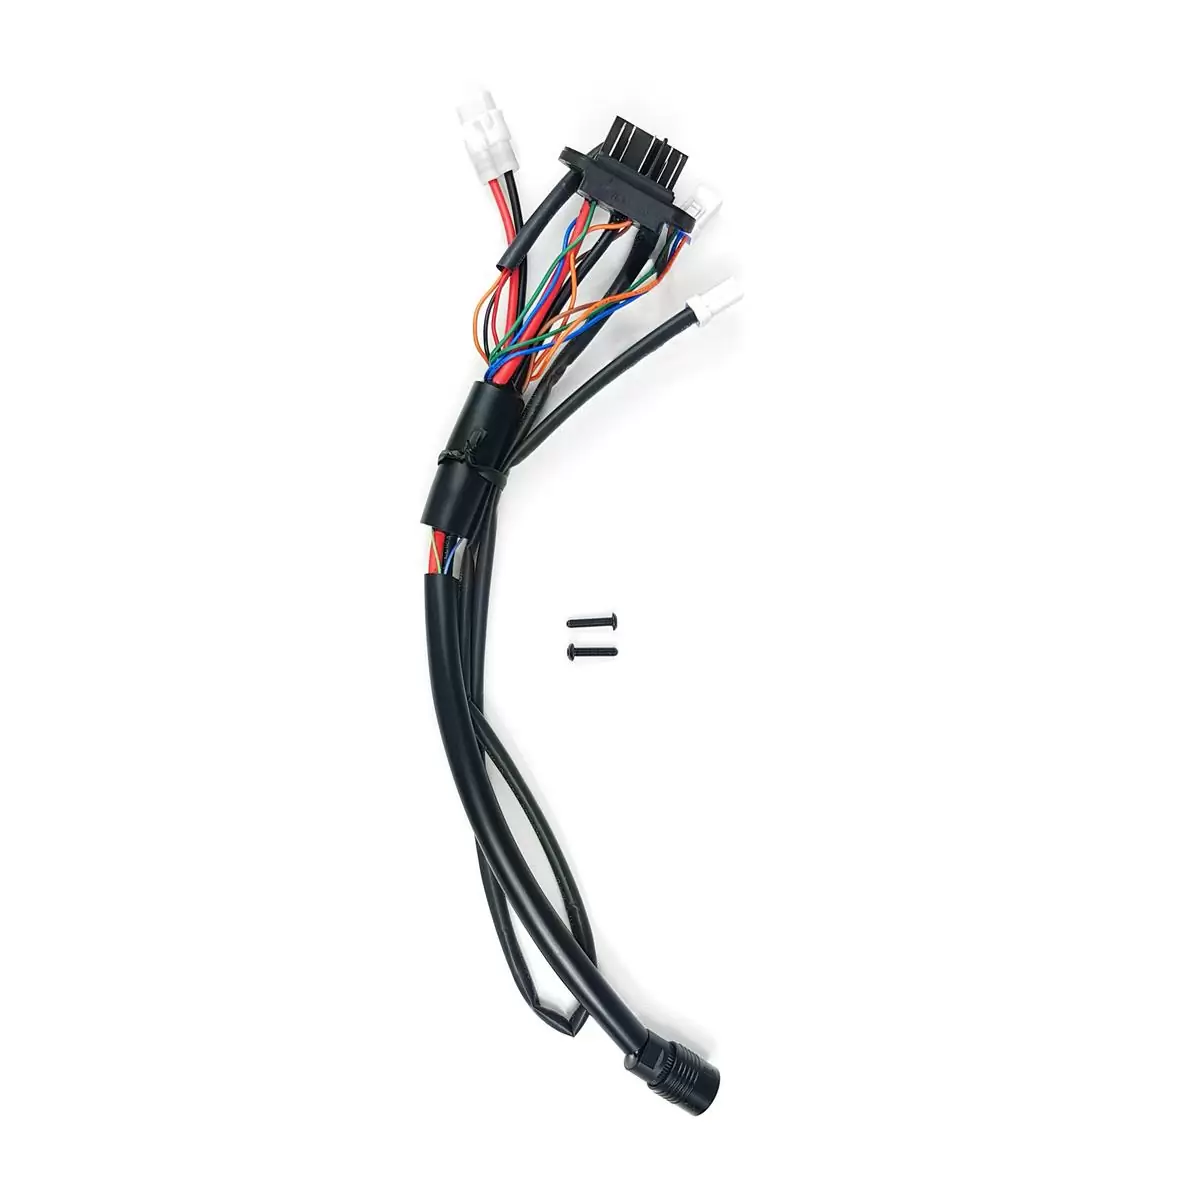 Motor connection cable - 630w battery Simplo Shimano motor - image